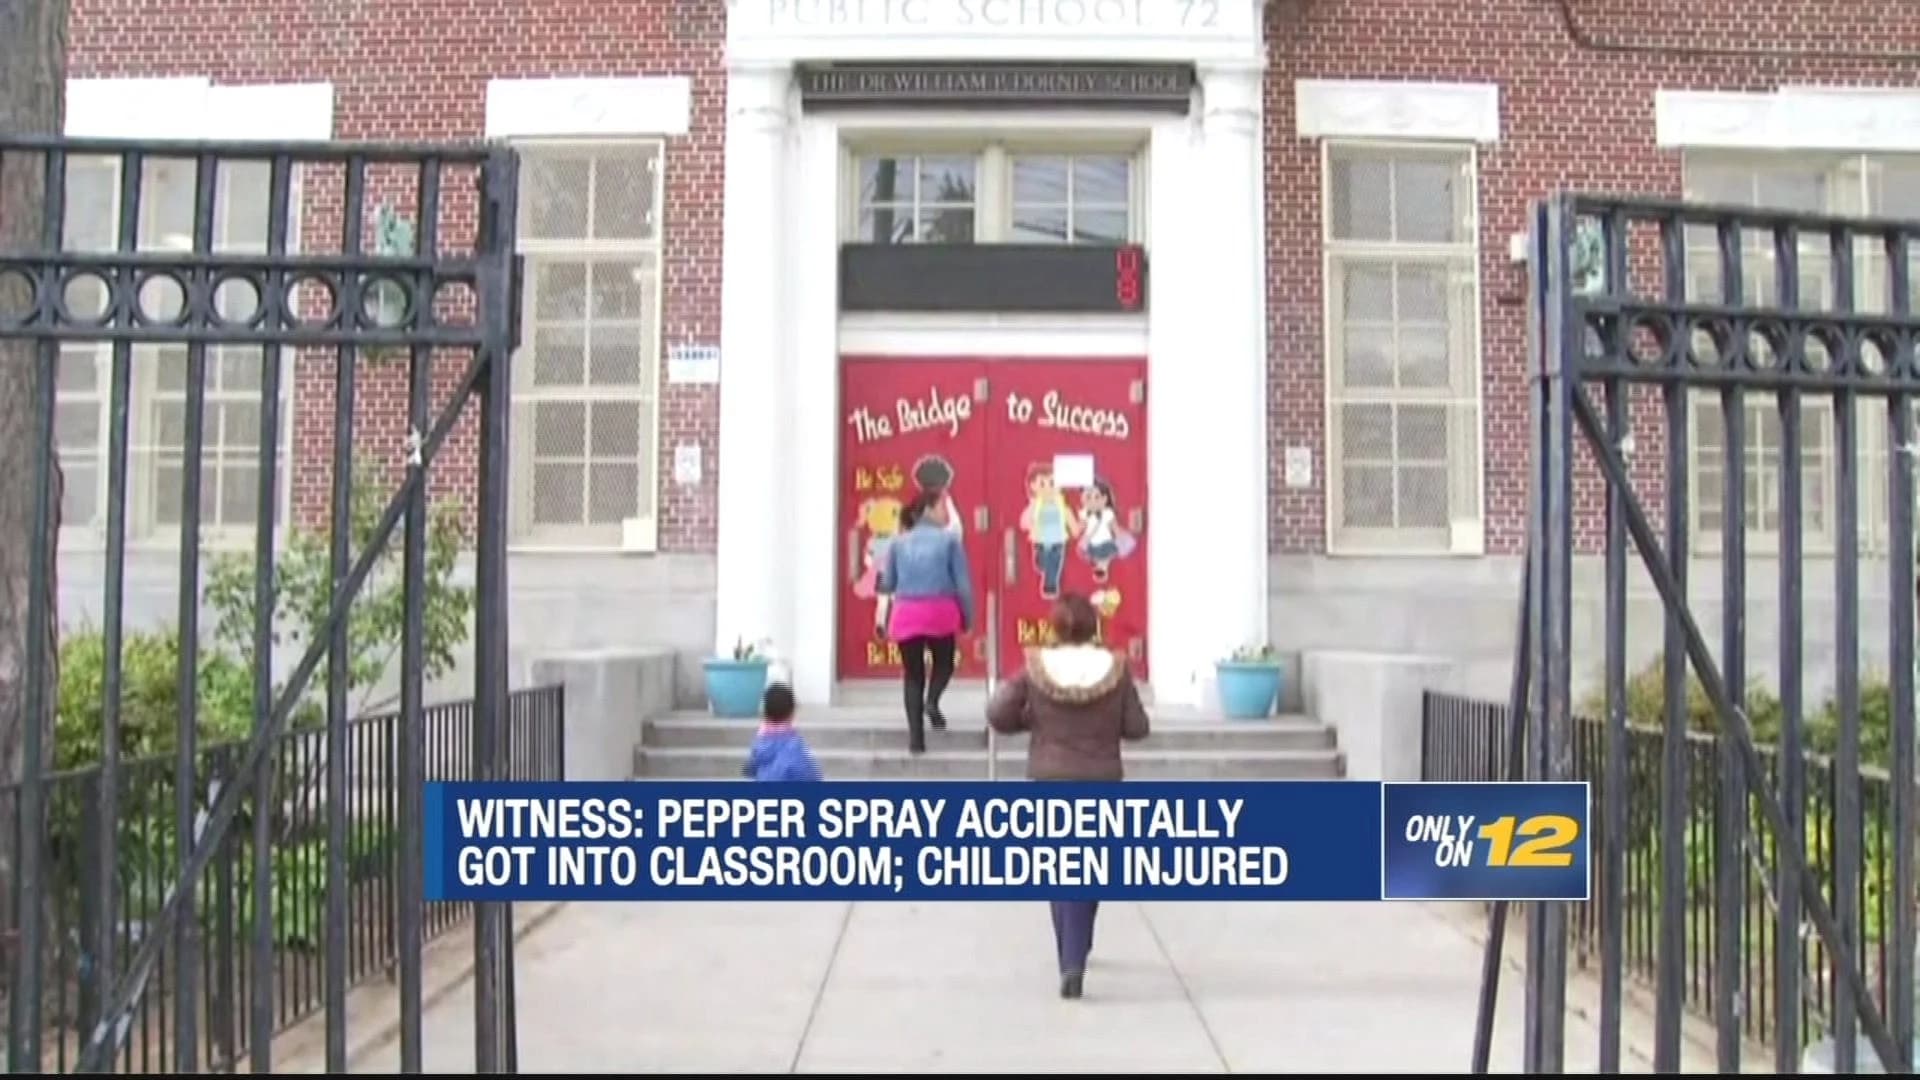 4th-grade classrooms accidentally pepper-sprayed at P.S. 72